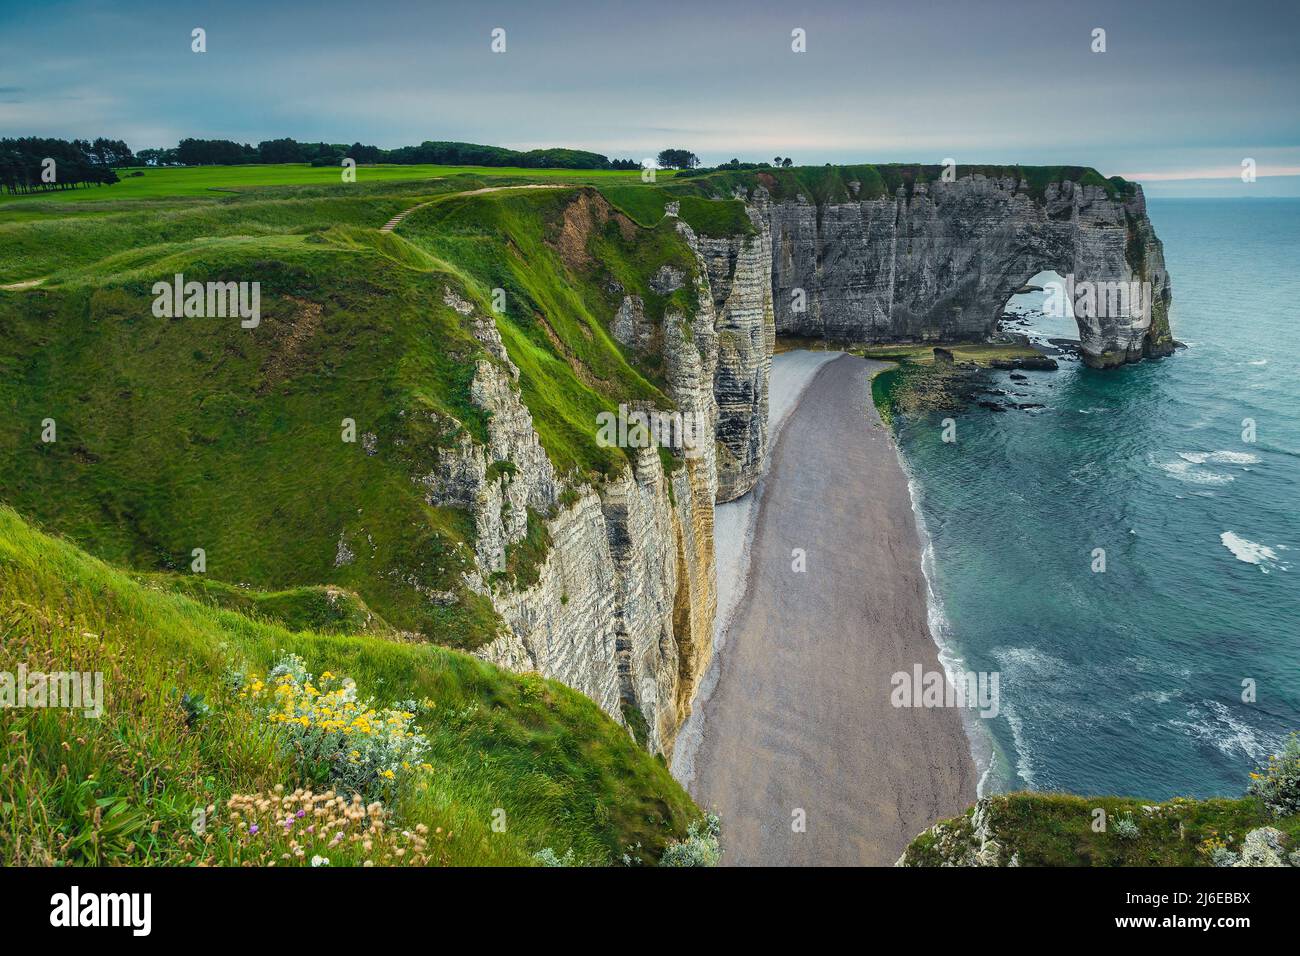 Amazing seaside landscape with picturesque high cliffs and green fields, Etretat, Normandy, France, Europe Stock Photo